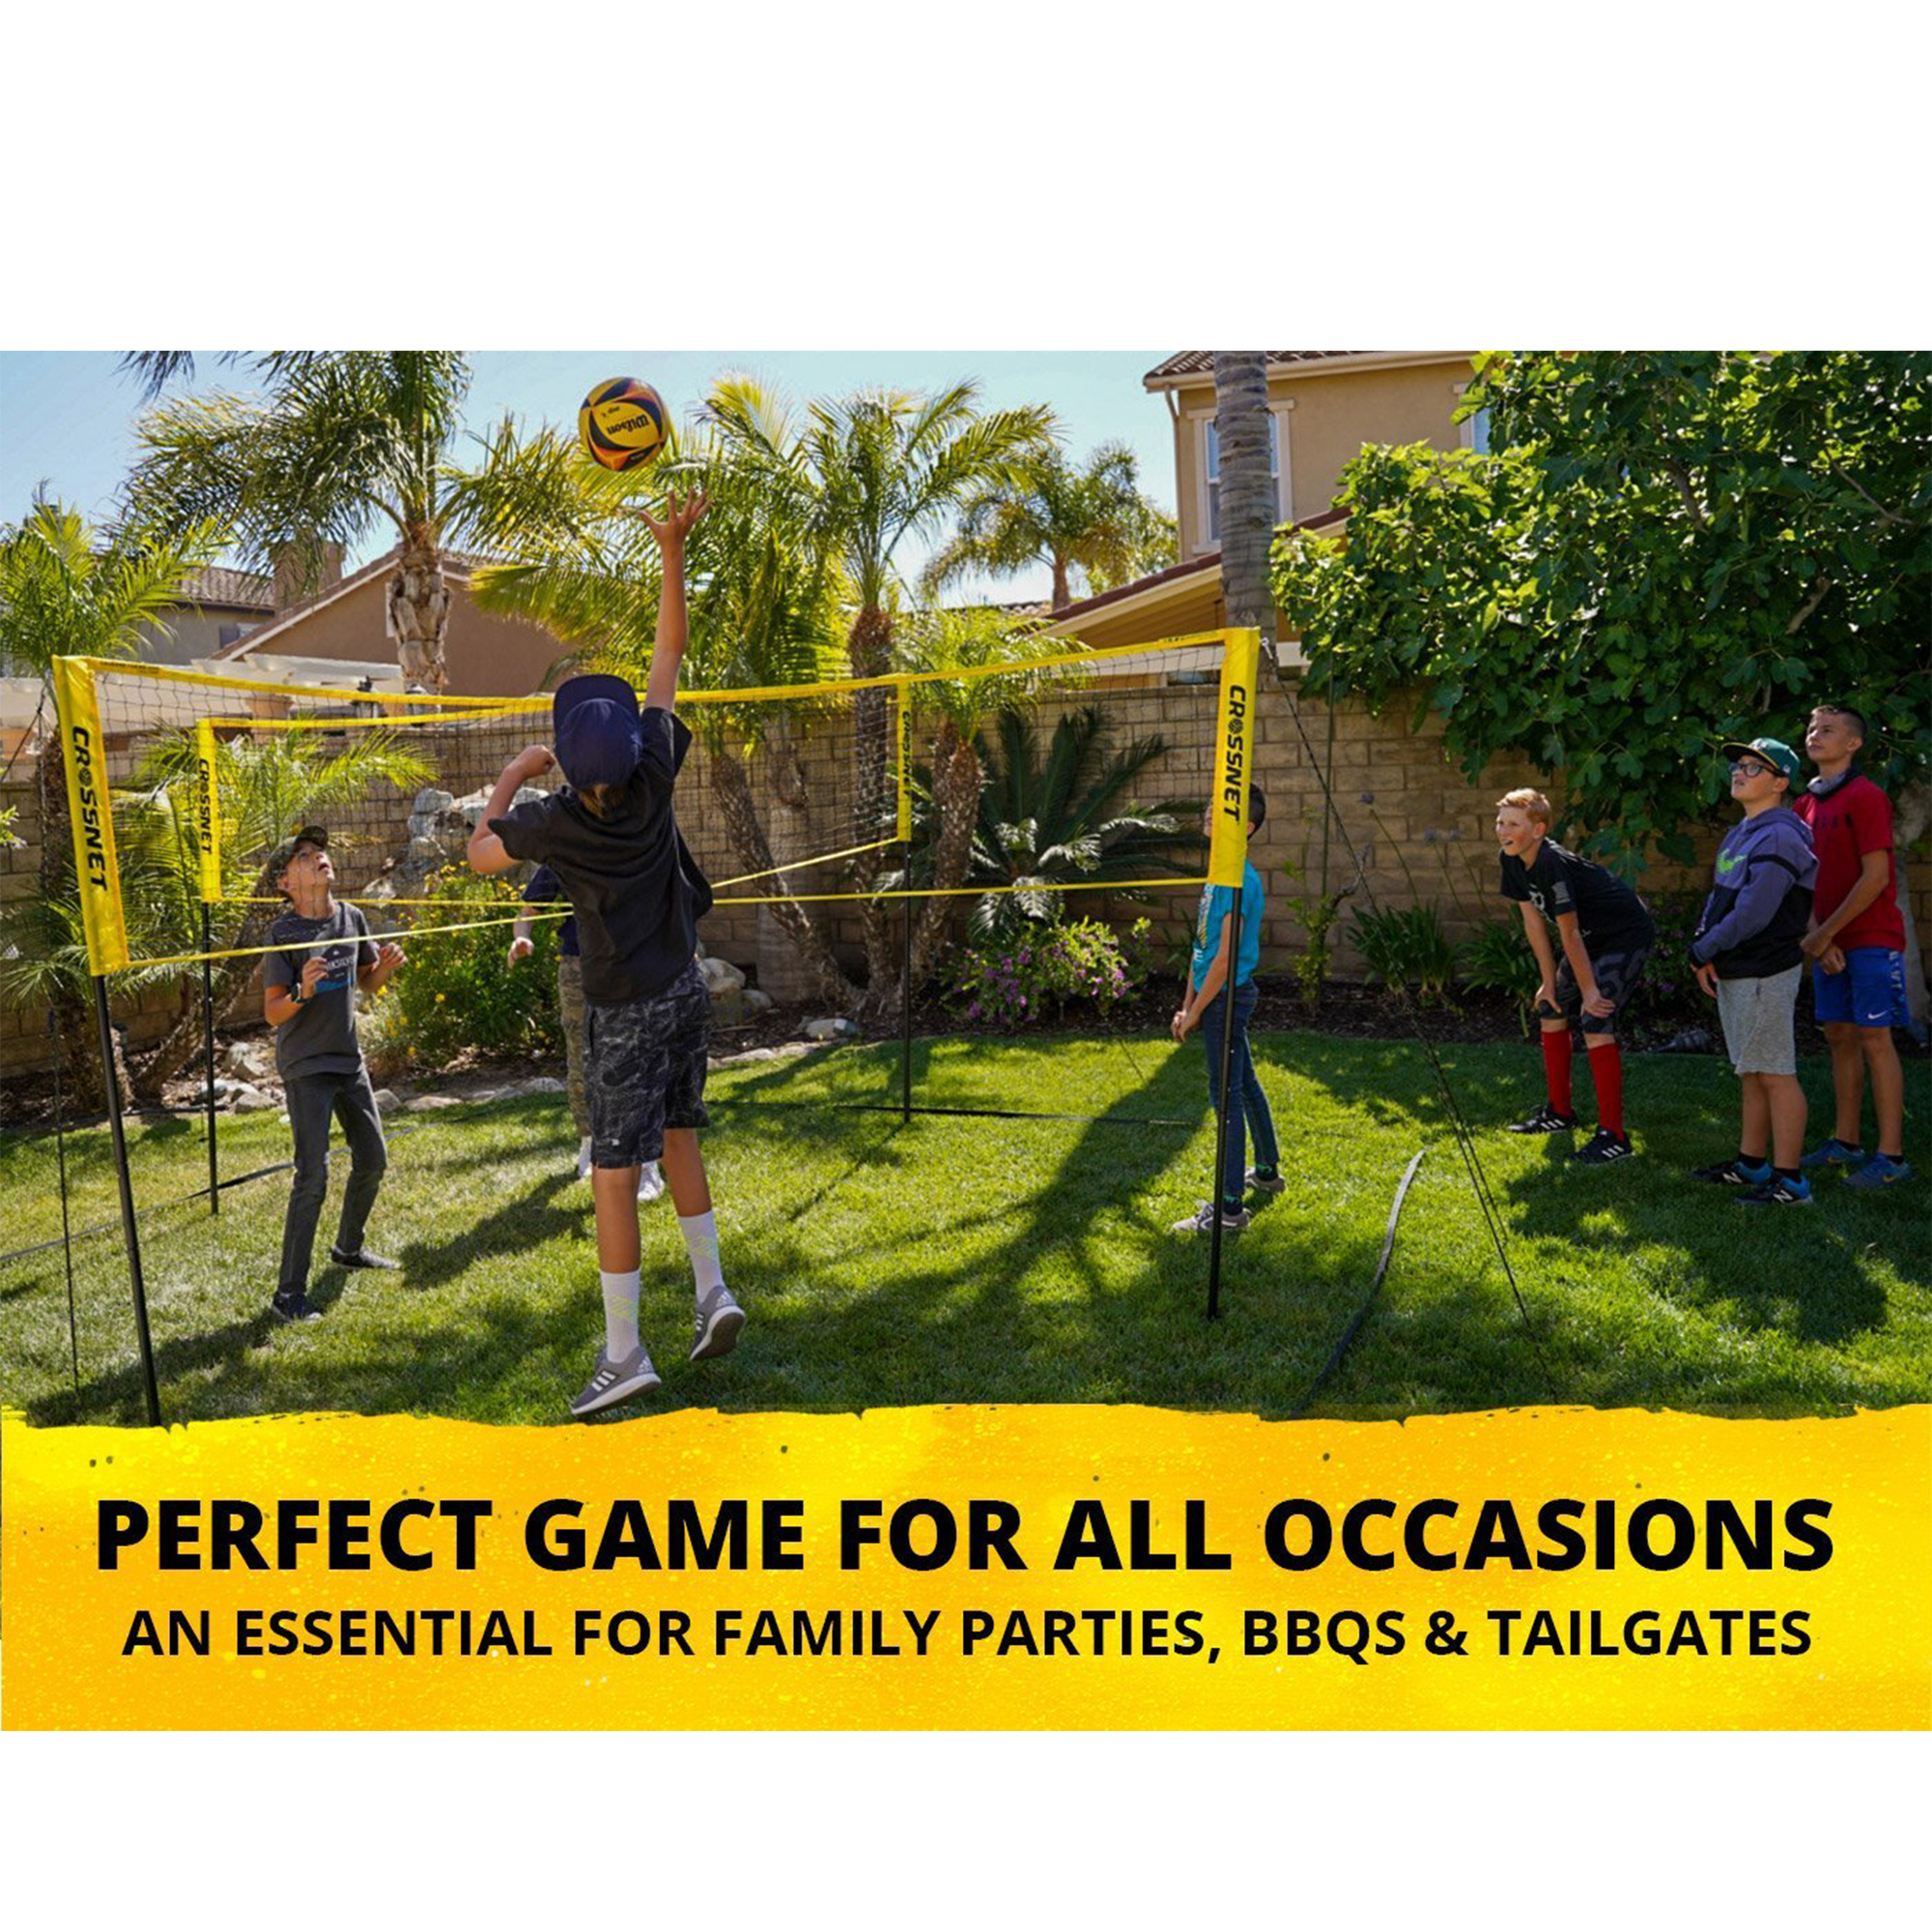 Crossnet 4 Way Adjustable Volleyball Net and Volleyball Game Set (Open Box)  193802072389 | eBay